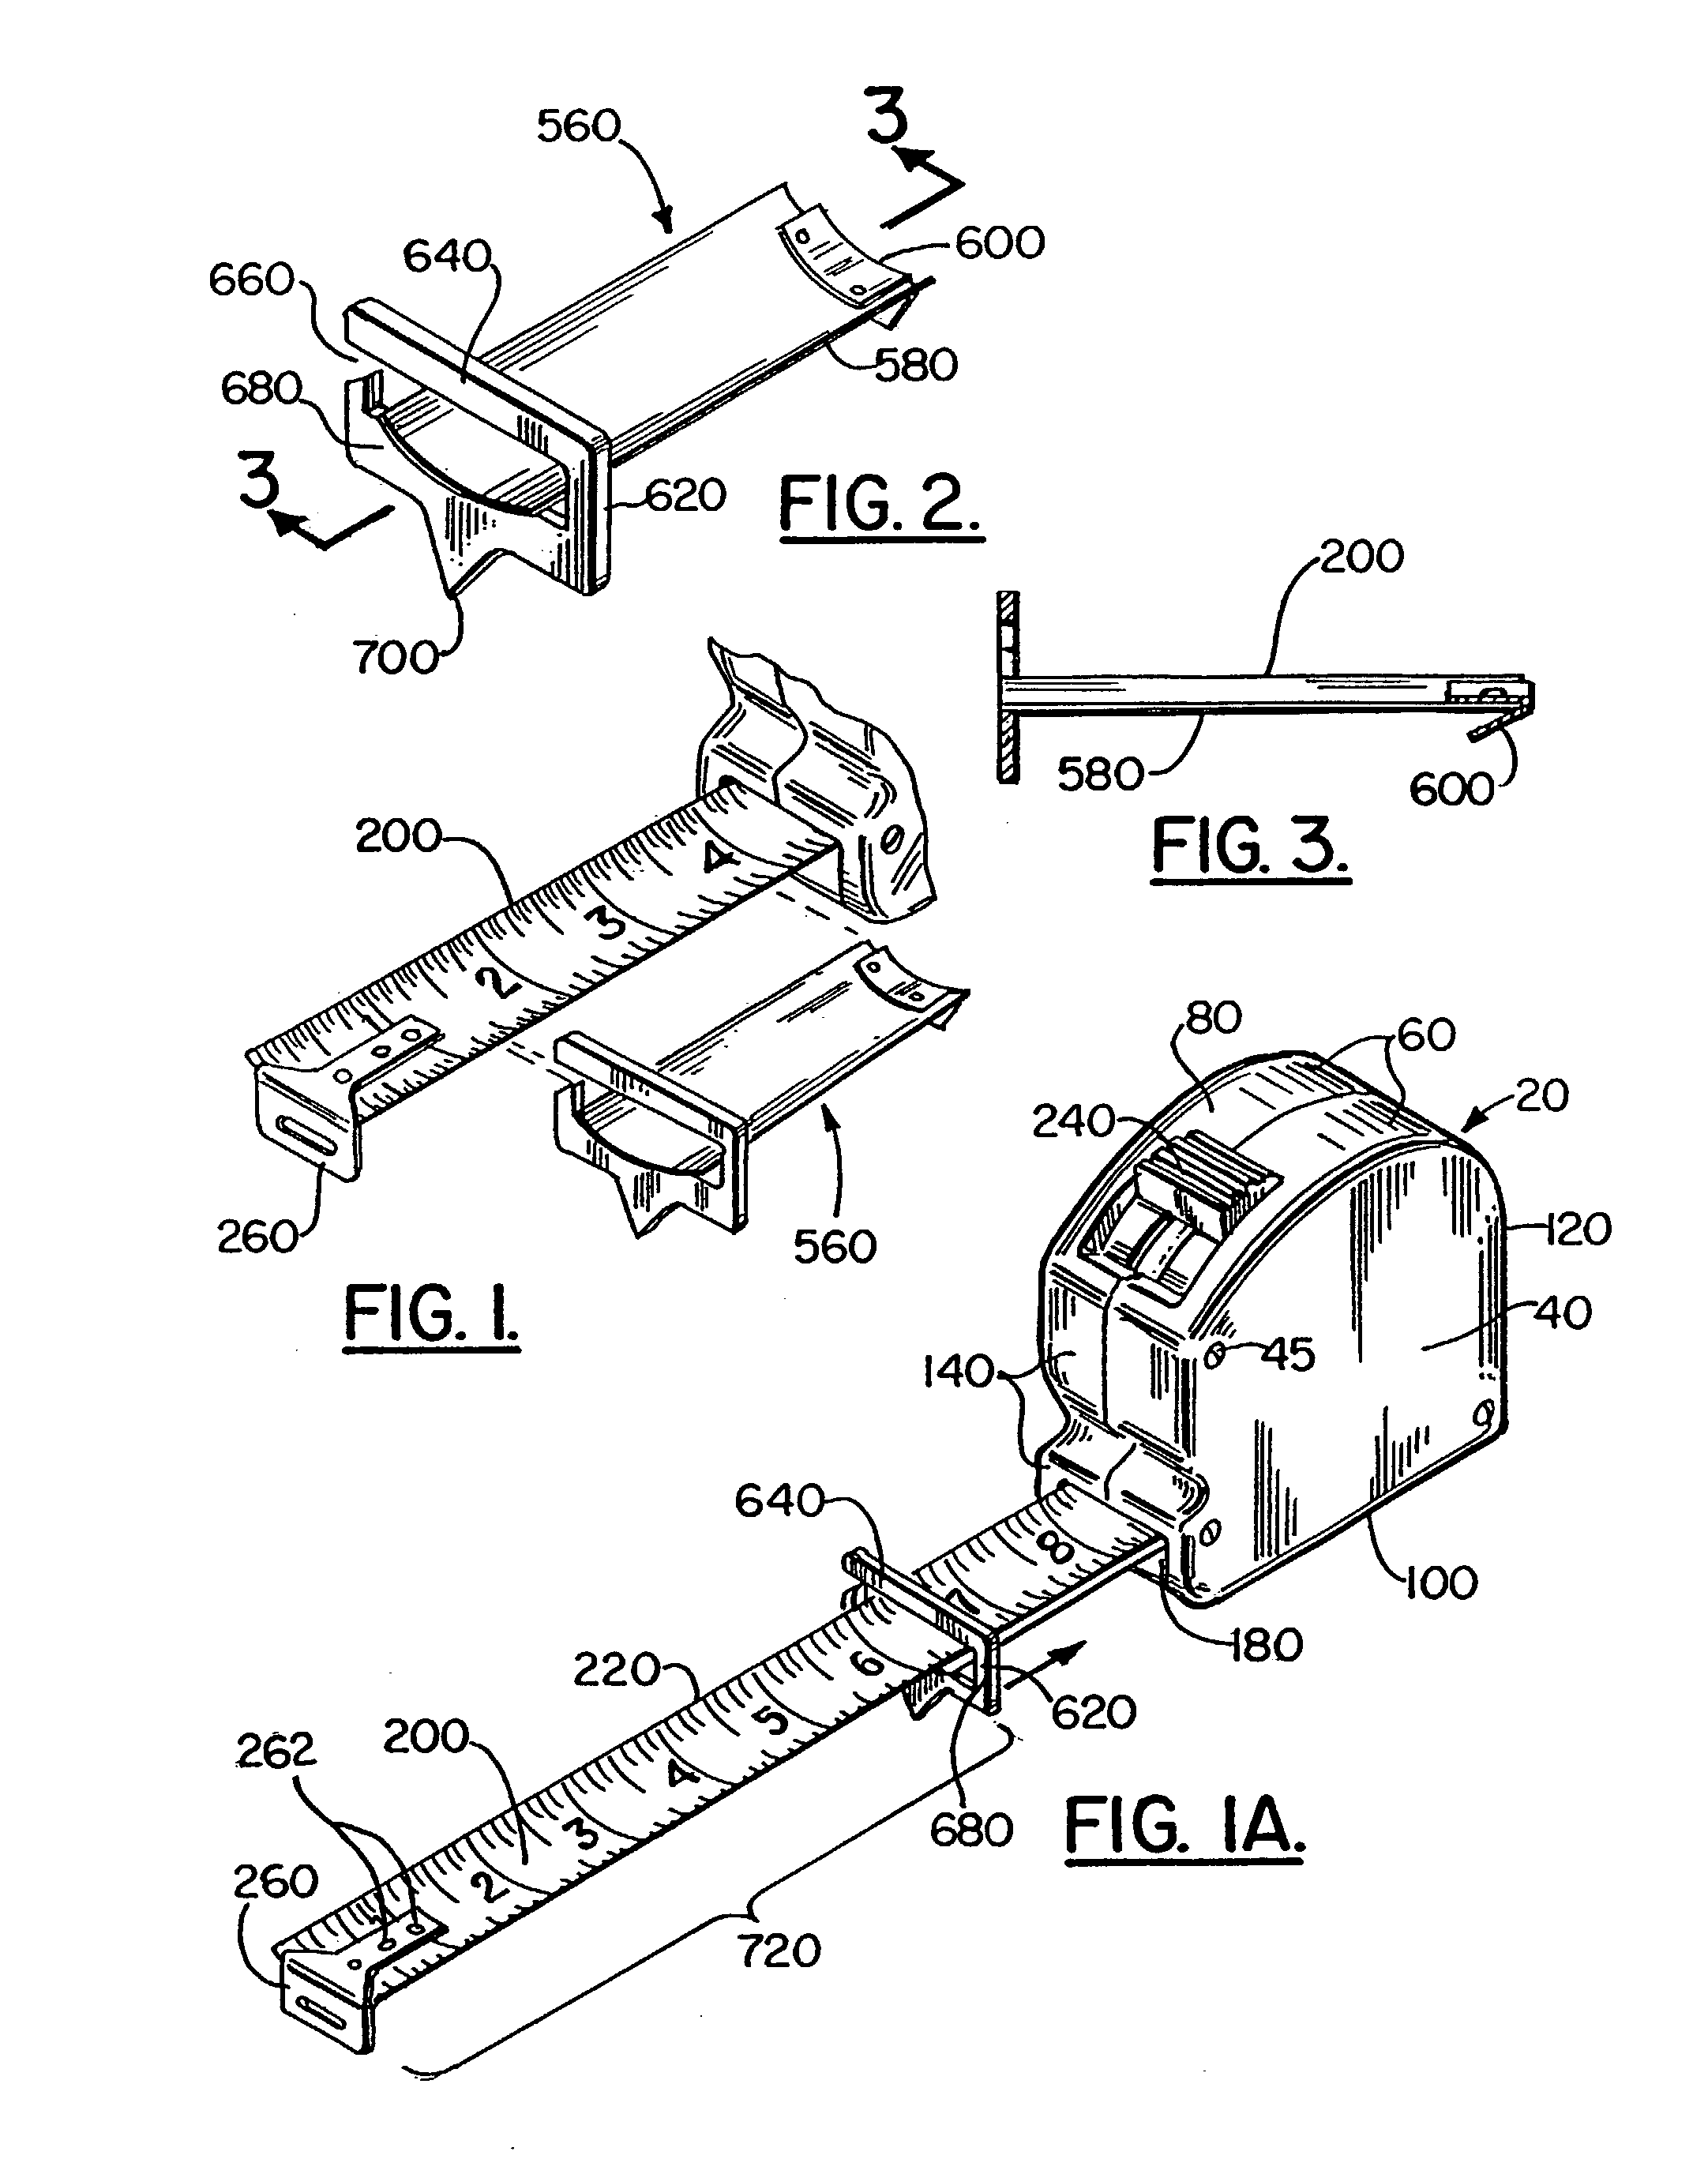 Tape measure apparatus which can be used as a marking gauge and/or compass